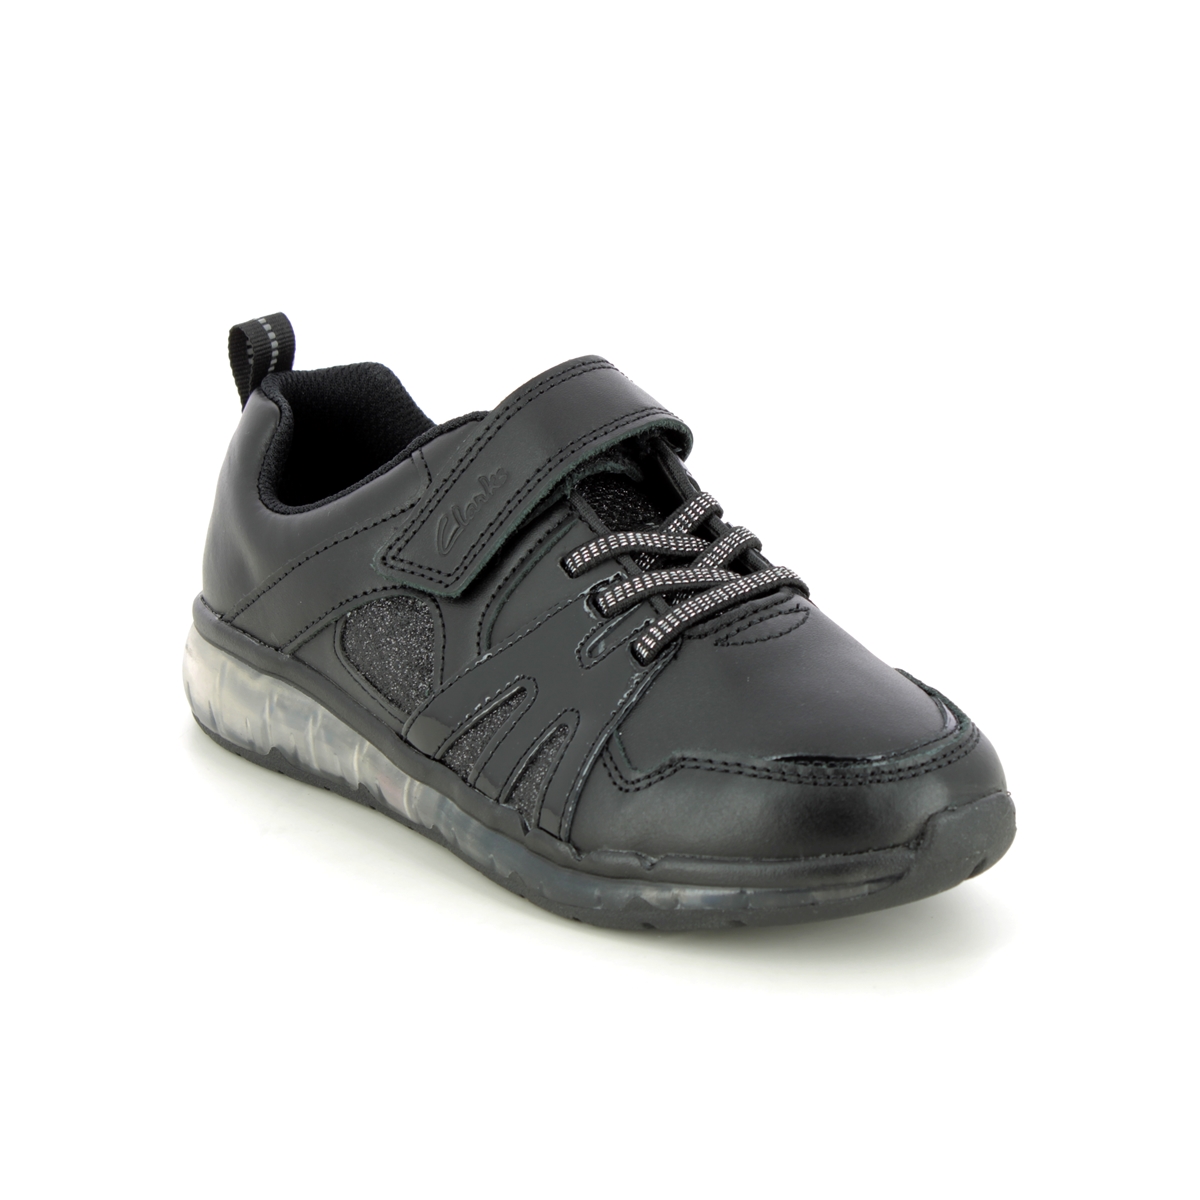 Clarks Spark Glow O Black Leather Kids Girls School Shoes 686636F In Size 1.5 In Plain Black Leather F Width Fitting Regular Fit For School For kids